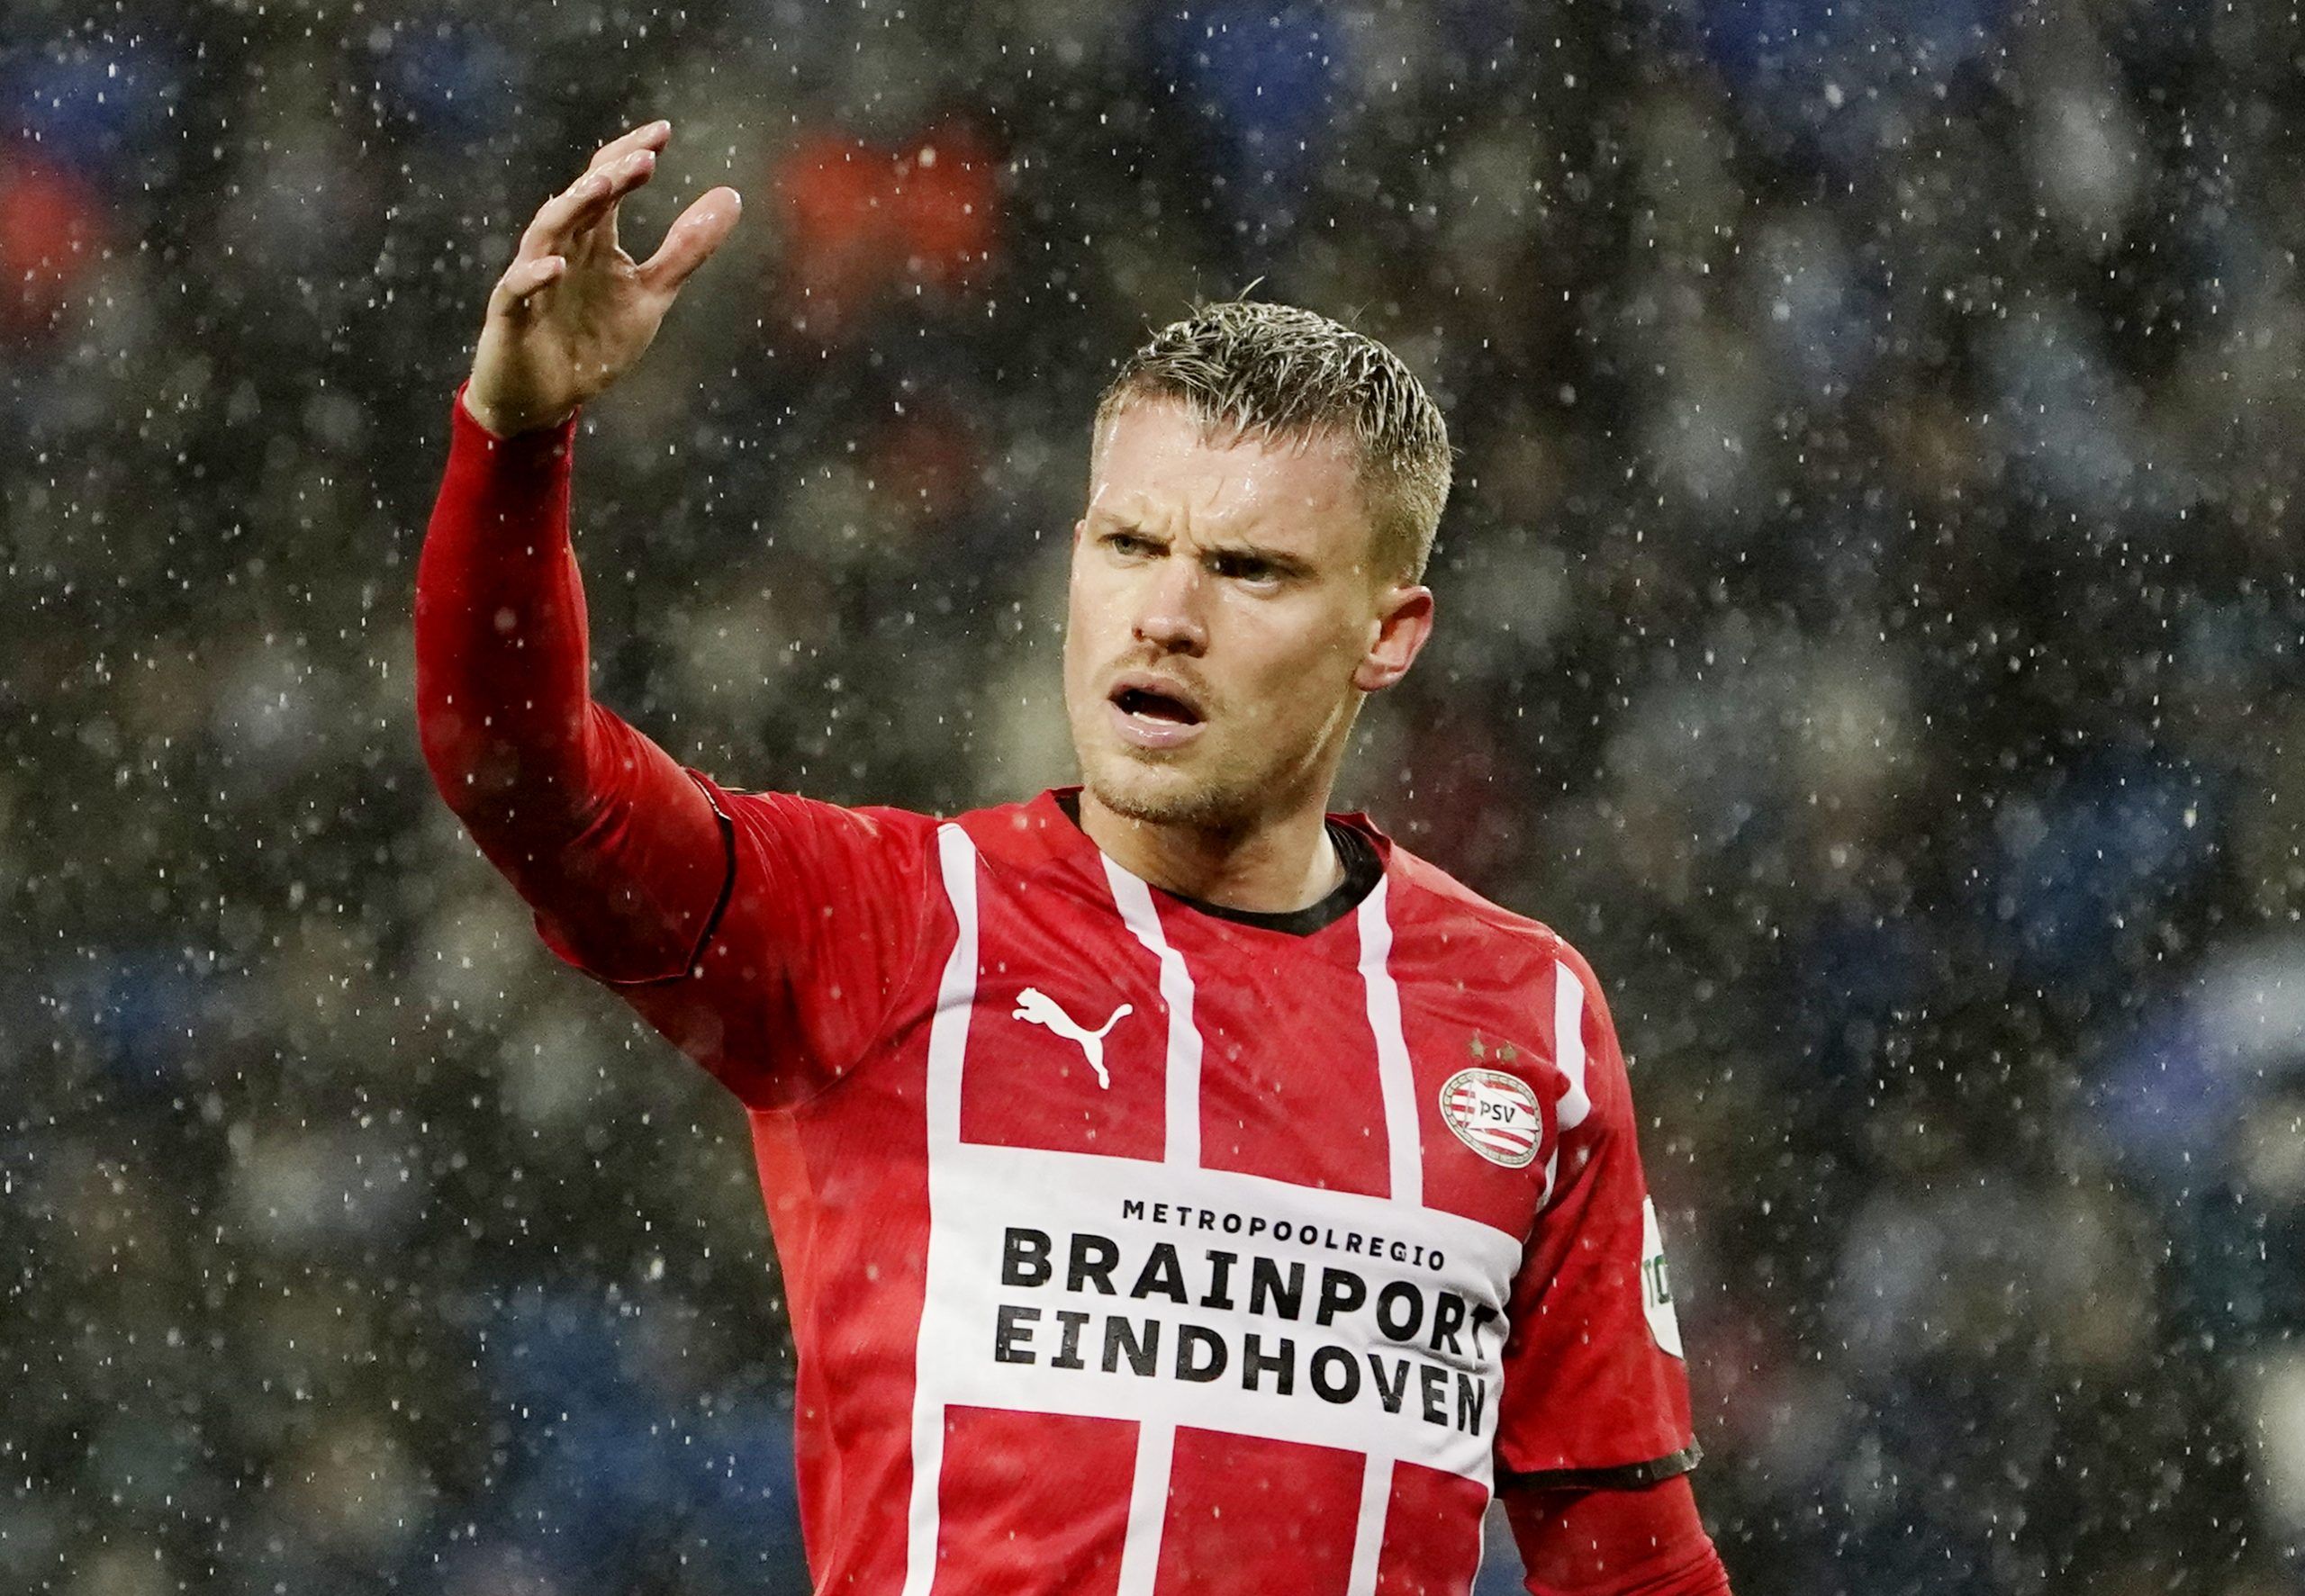 Soccer Football - Europa League - Group B - Real Sociedad v PSV Eindhoven - Reale Arena, San Sebastian, Spain - December 9, 2021  PSV Eindhoven's Philipp Max reacts REUTERS/Vincent West